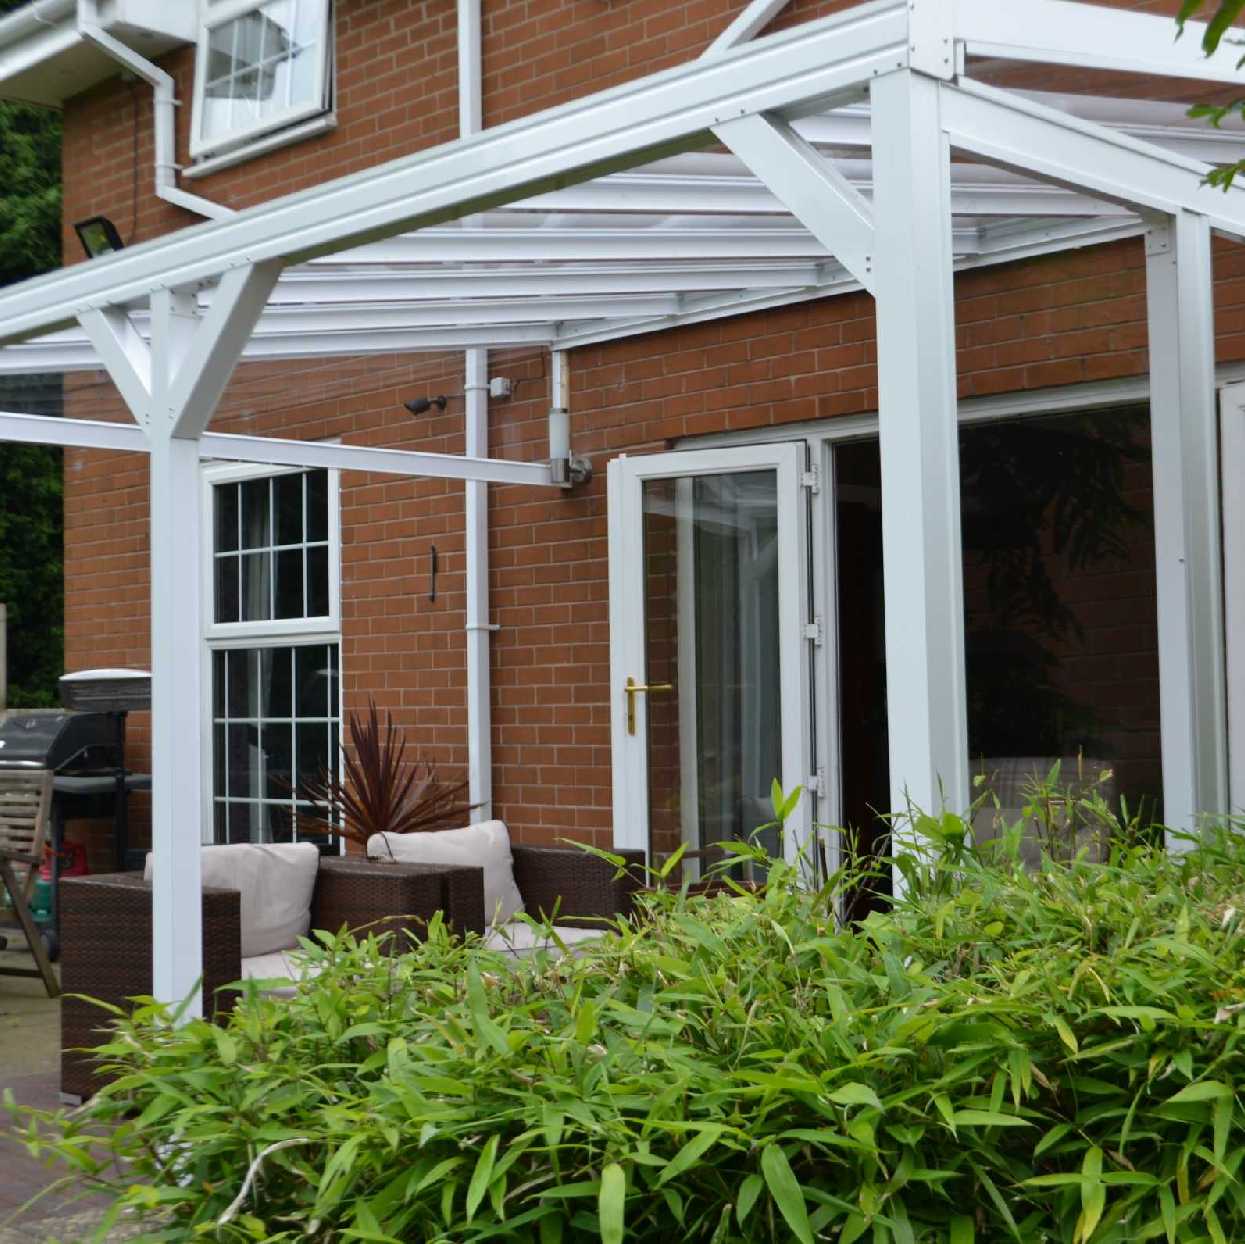 Omega Smart Lean-To Canopy, White with 6mm Glass Clear Plate Polycarbonate Glazing - 2.1m (W) x 1.5m (P), (2) Supporting Posts from Omega Build